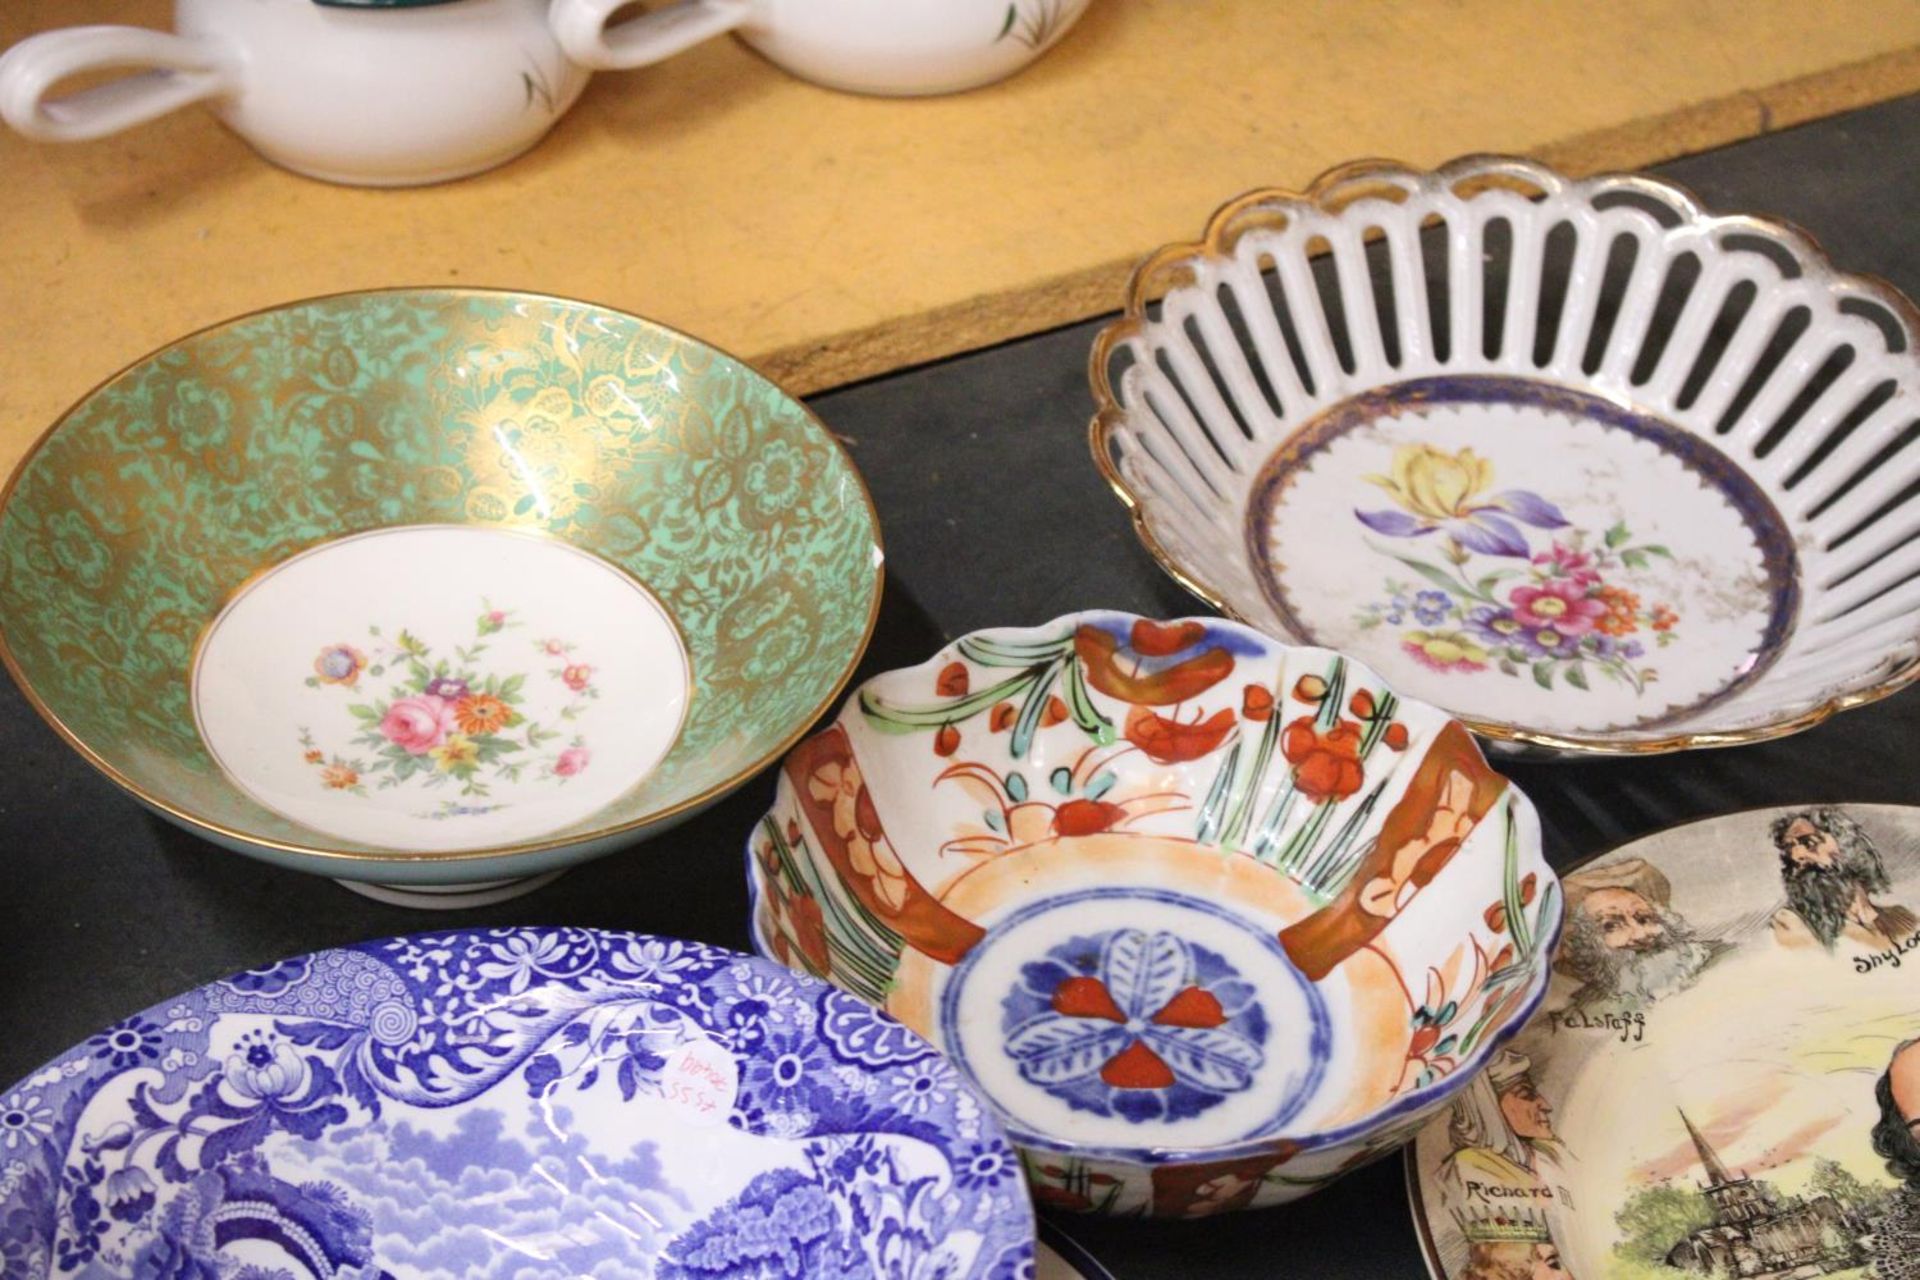 A COLLECTION OF PLATES AND BOWLS INCLUDING ROYAL DOULTON, KILN CRAFT, COPELAND ETC - Image 5 of 5